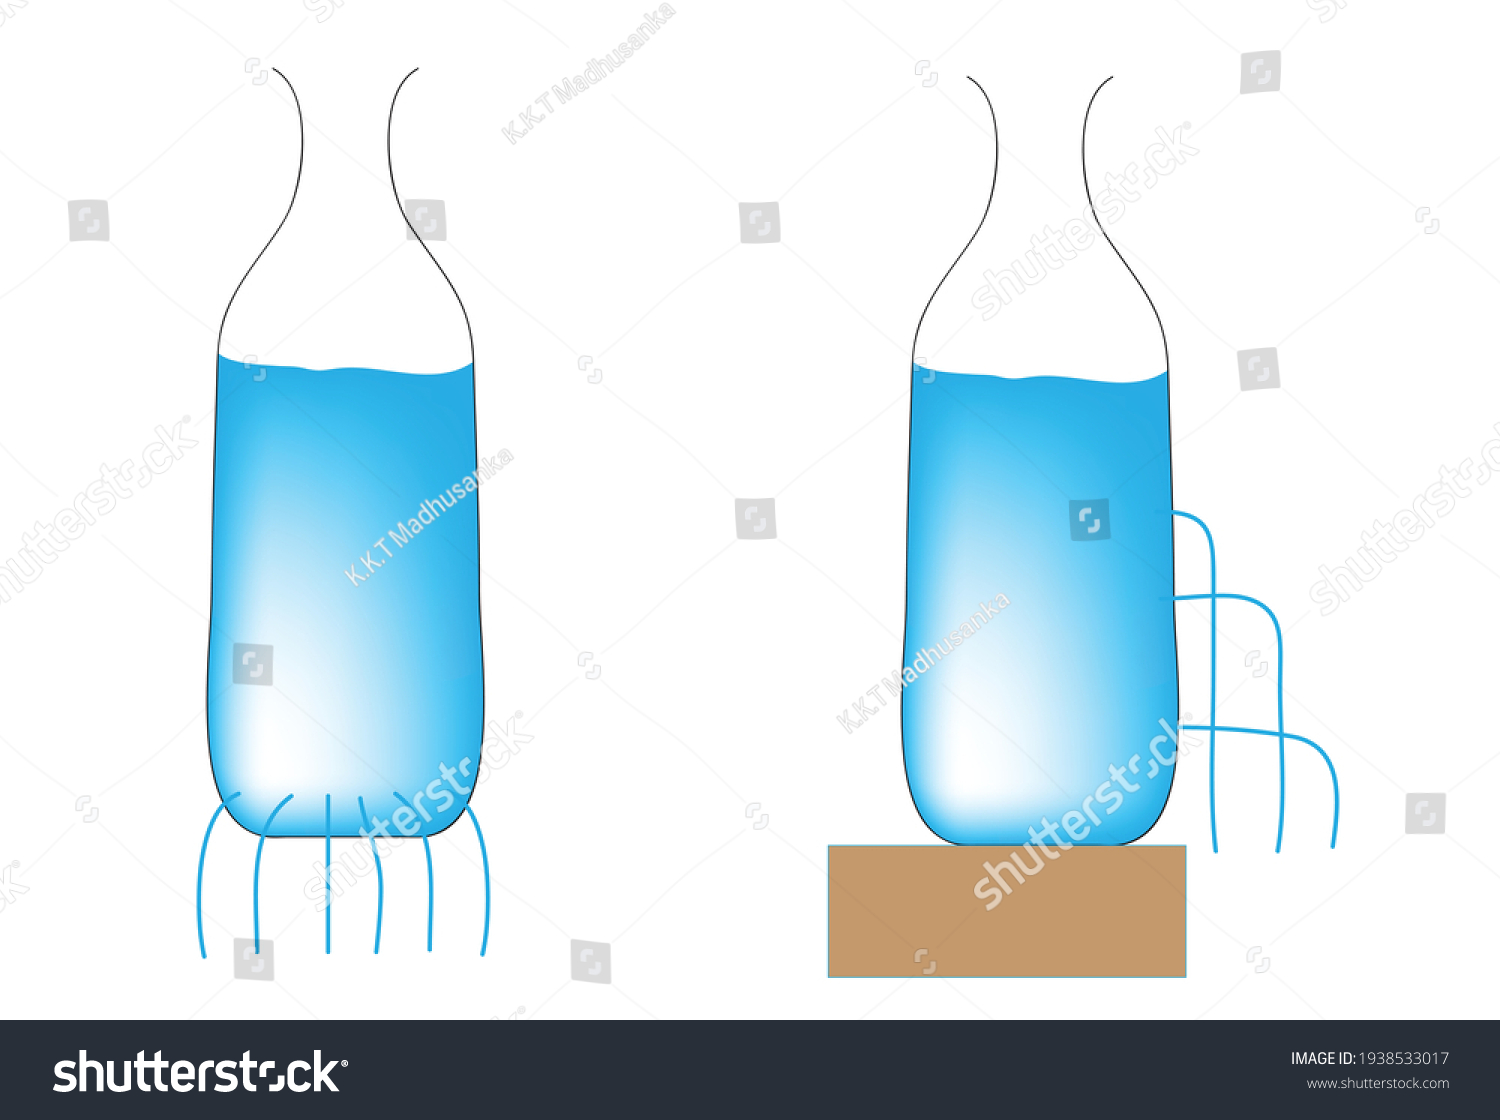 SVG of Different pressure points of water with height, Variation of the 
pressure with the height of the 
liquid column, water liquid pressure with height, Physical experiment concerning fluid dynamics svg